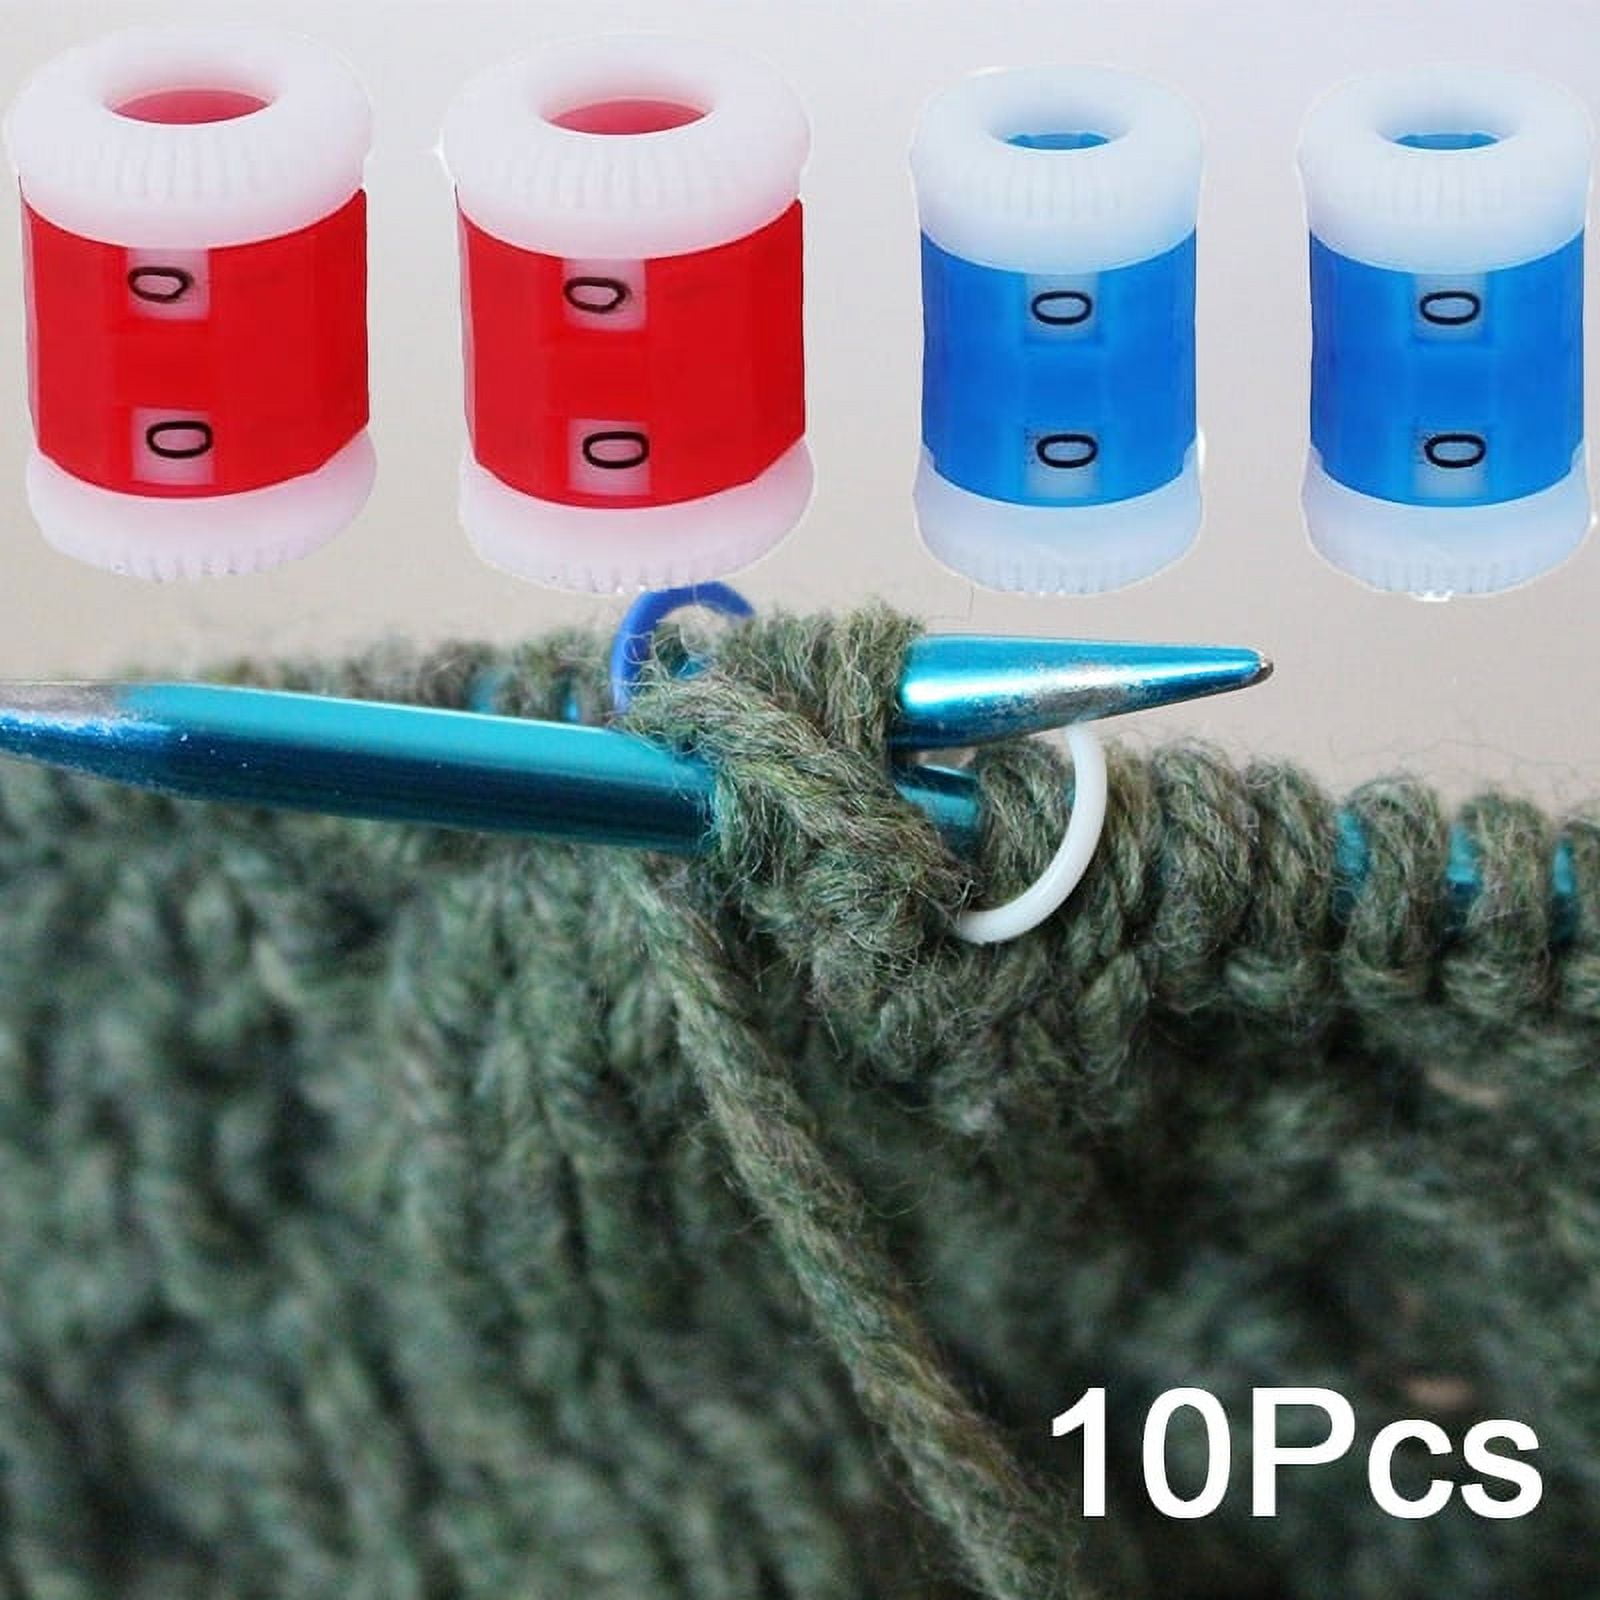 10pcs Knitting Counter Red/blue Plastic Manual Counter Round Stitch Weaving  Tool